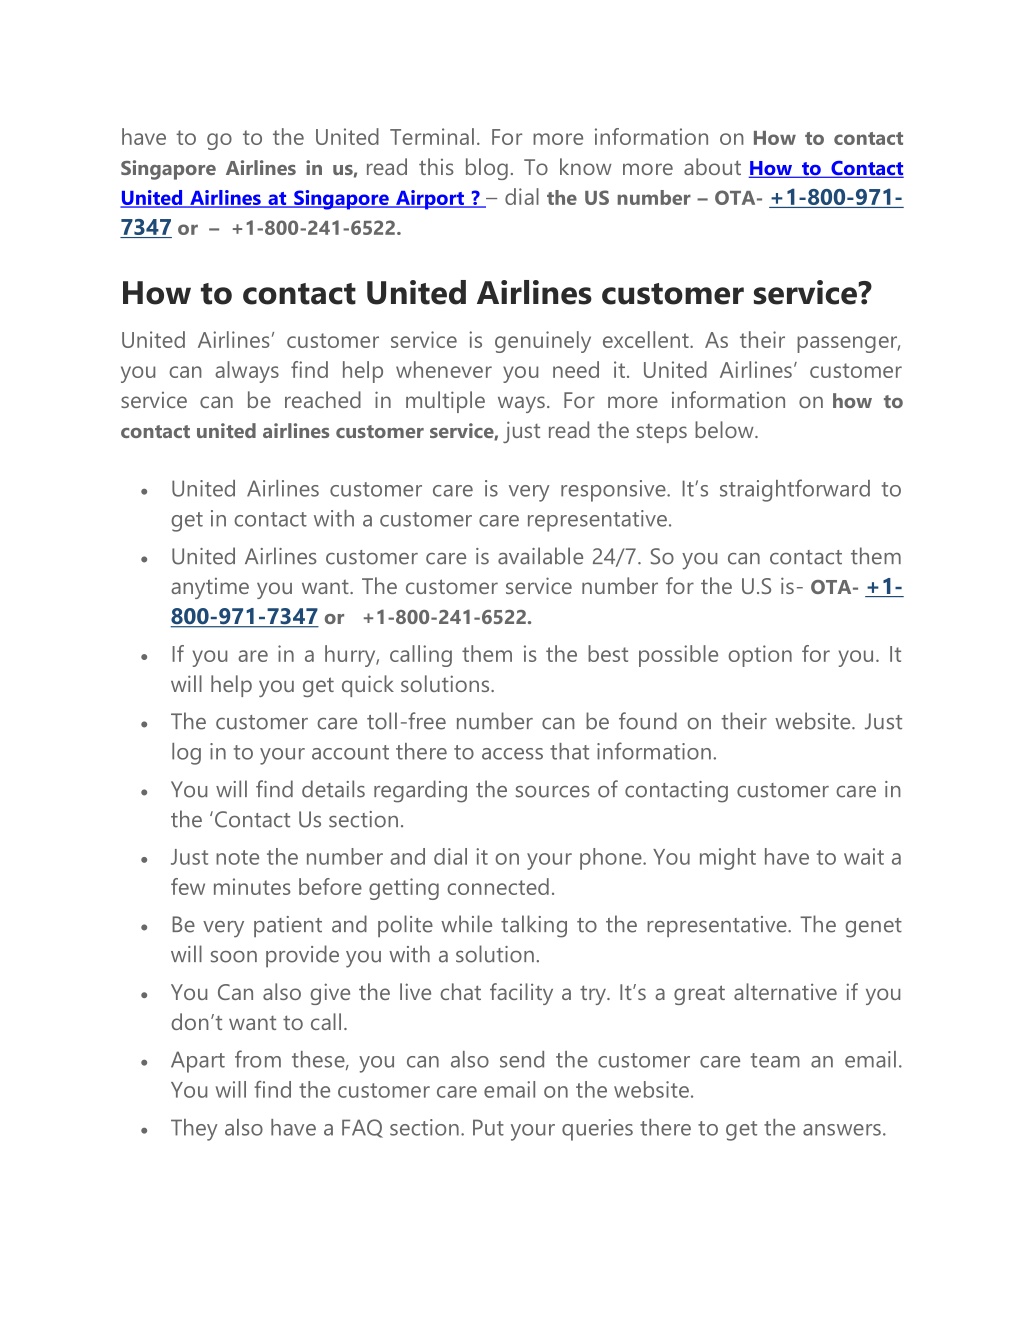 PPT - How to Contact United Airlines at Singapore Airport PowerPoint ...